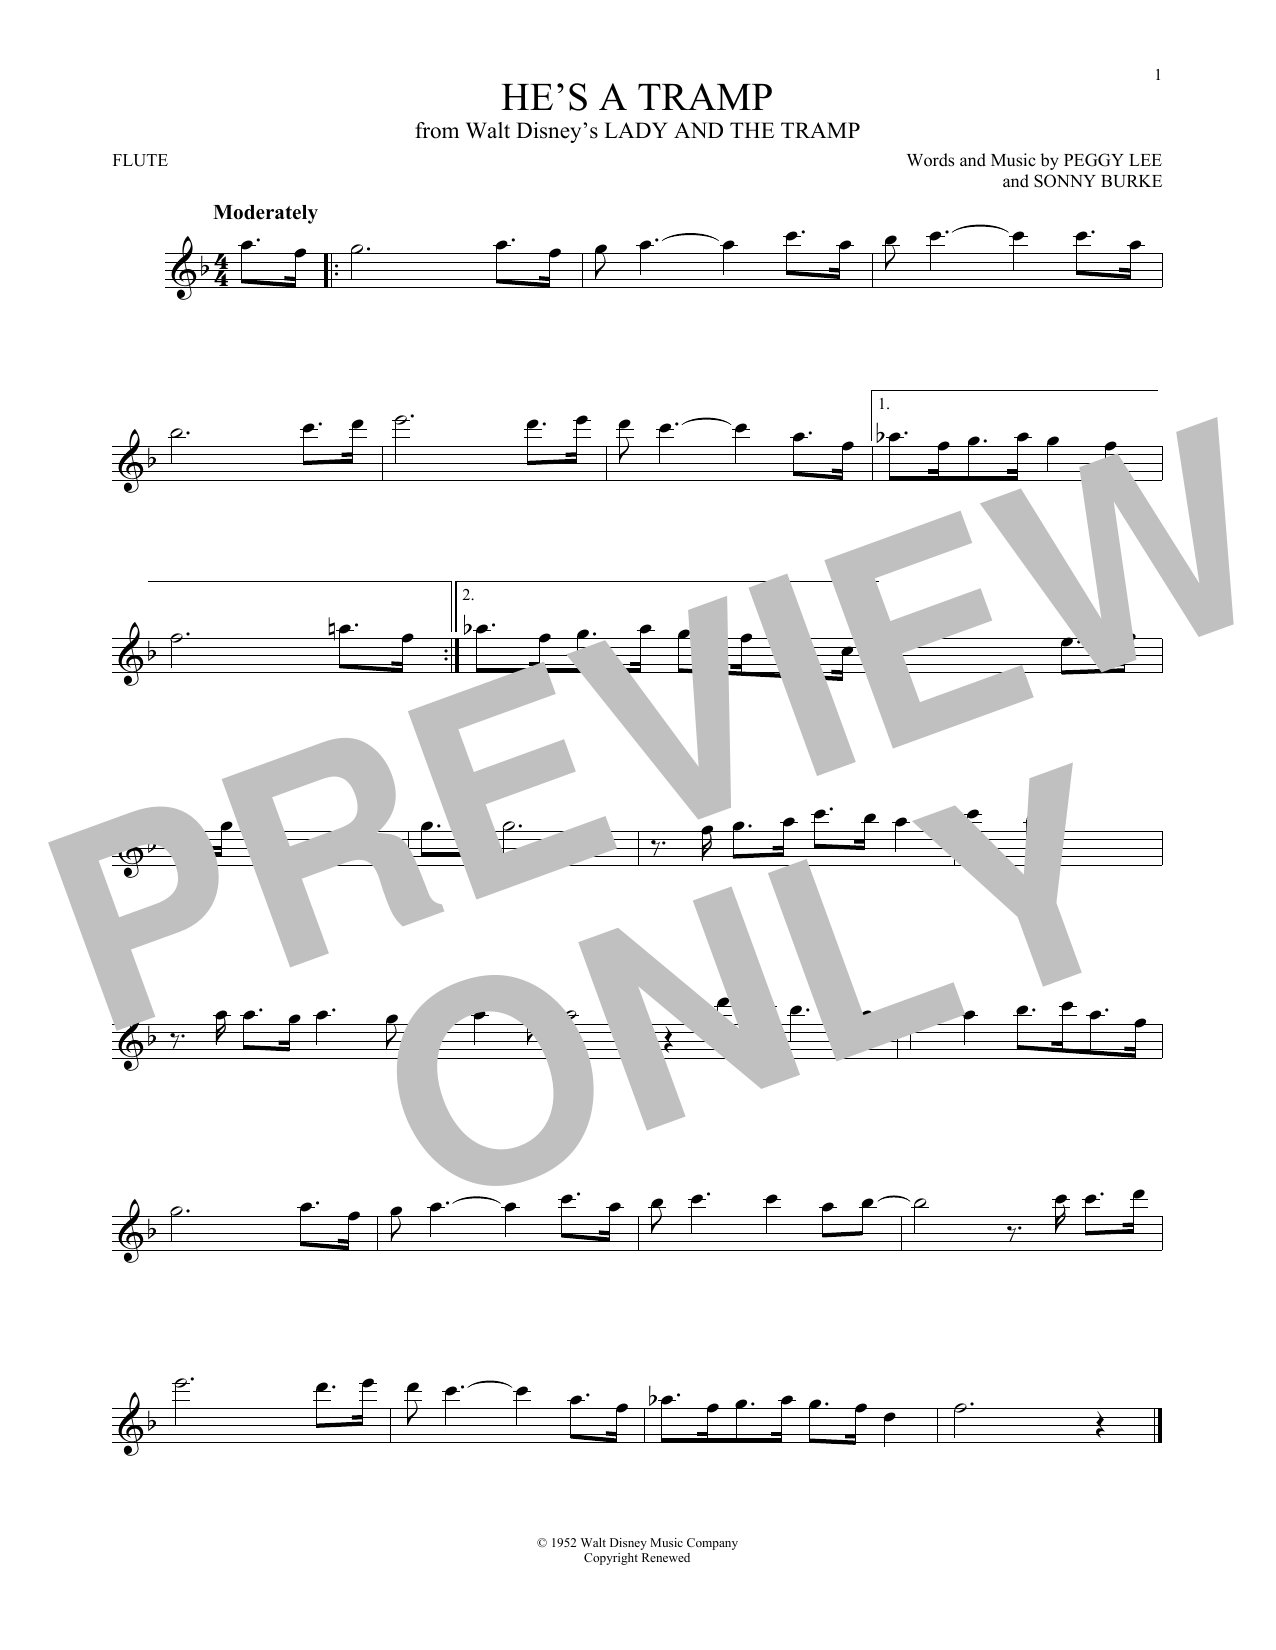 Download Peggy Lee & Sonny Burke He's A Tramp (from Lady And The Tramp) Sheet Music